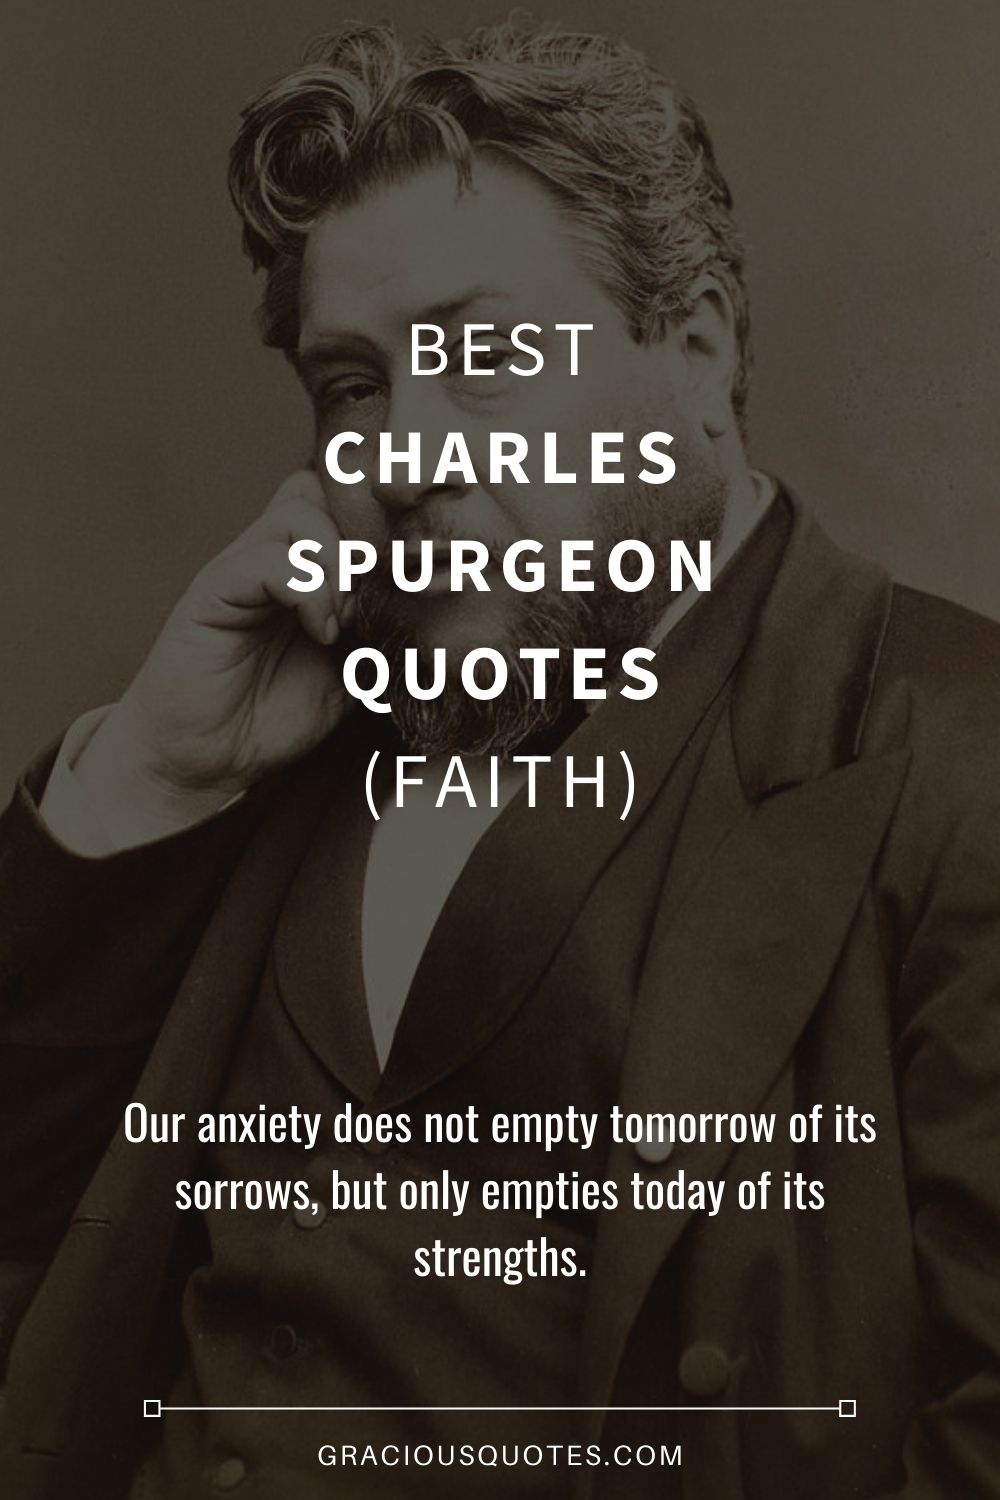 Best Charles Spurgeon Quotes (FAITH) - Gracious Quotes